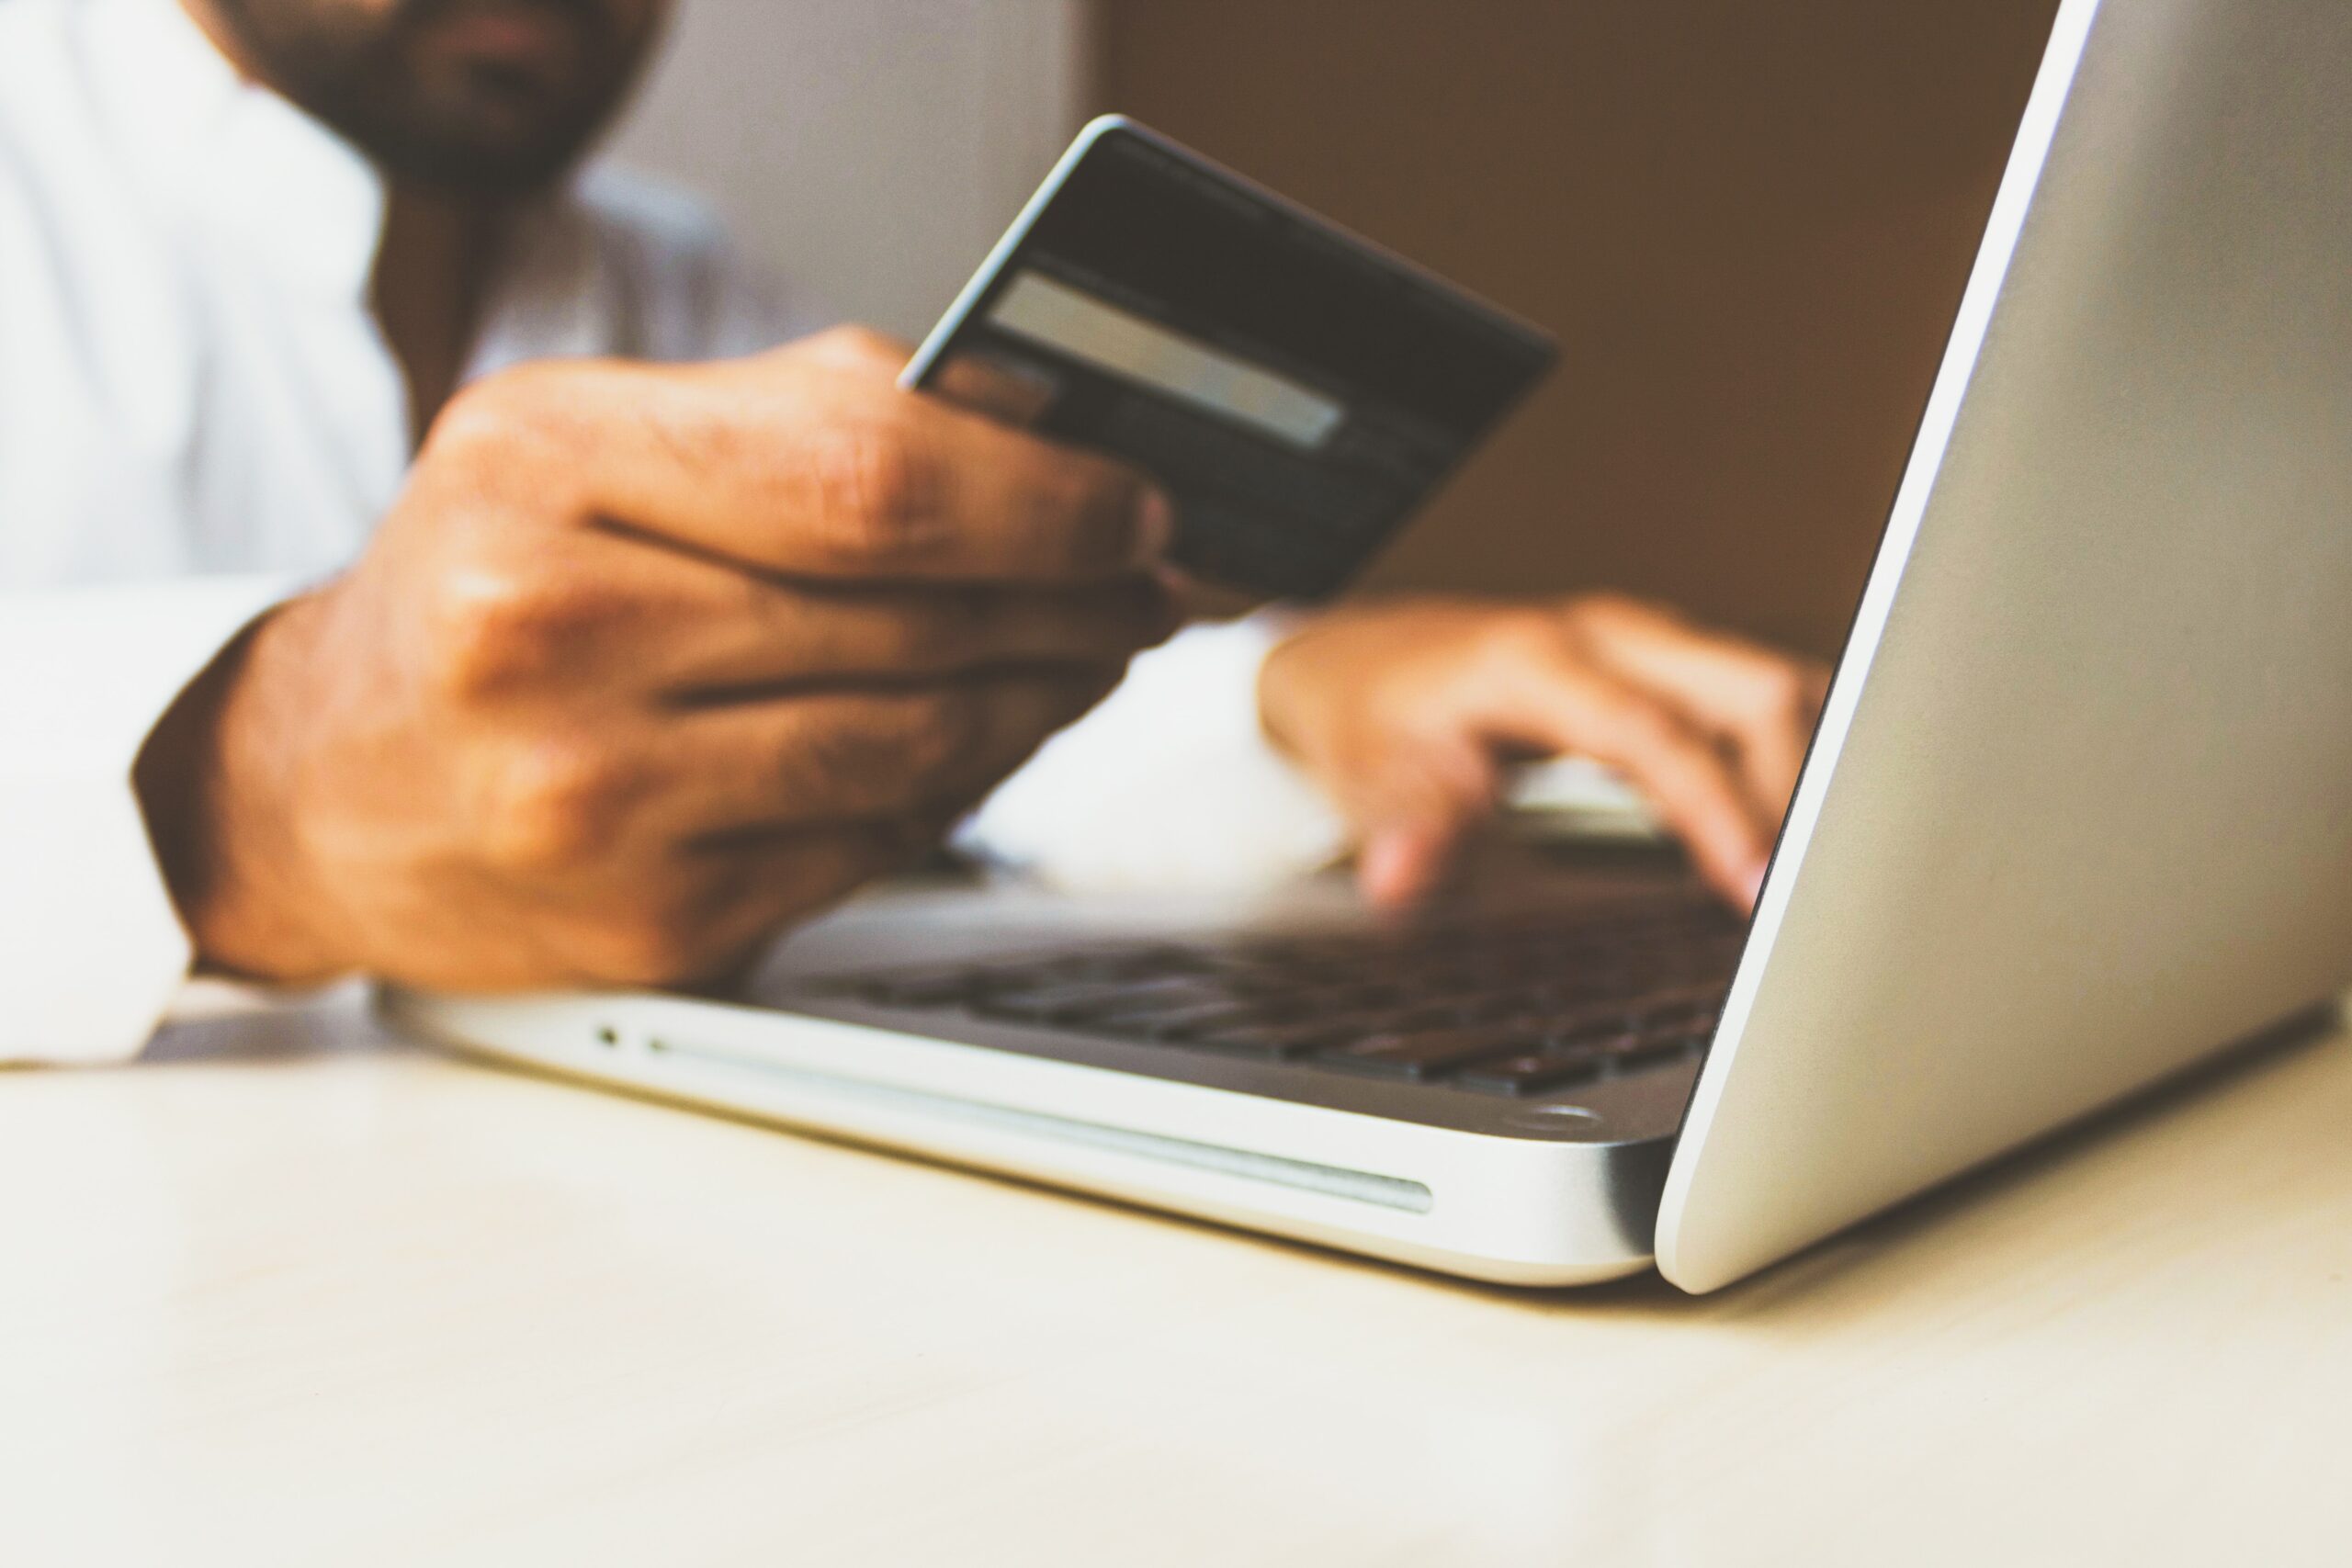 Step 2: Should your business be offering online transactions?